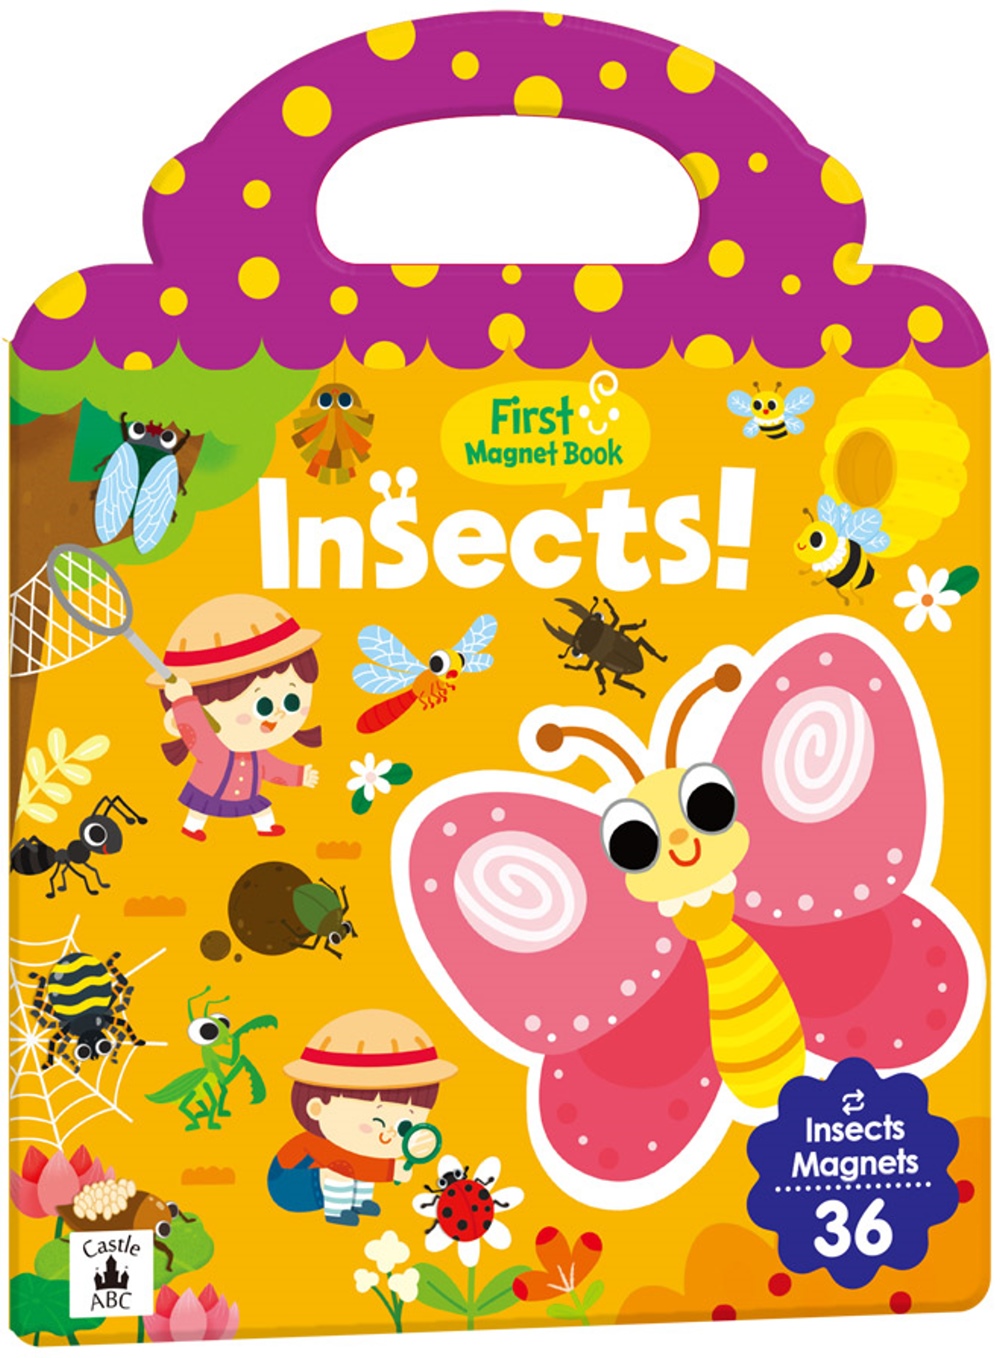 First Magnet Book：Insects（內含36個認知磁鐵+3摺頁超大場景）(限台灣)